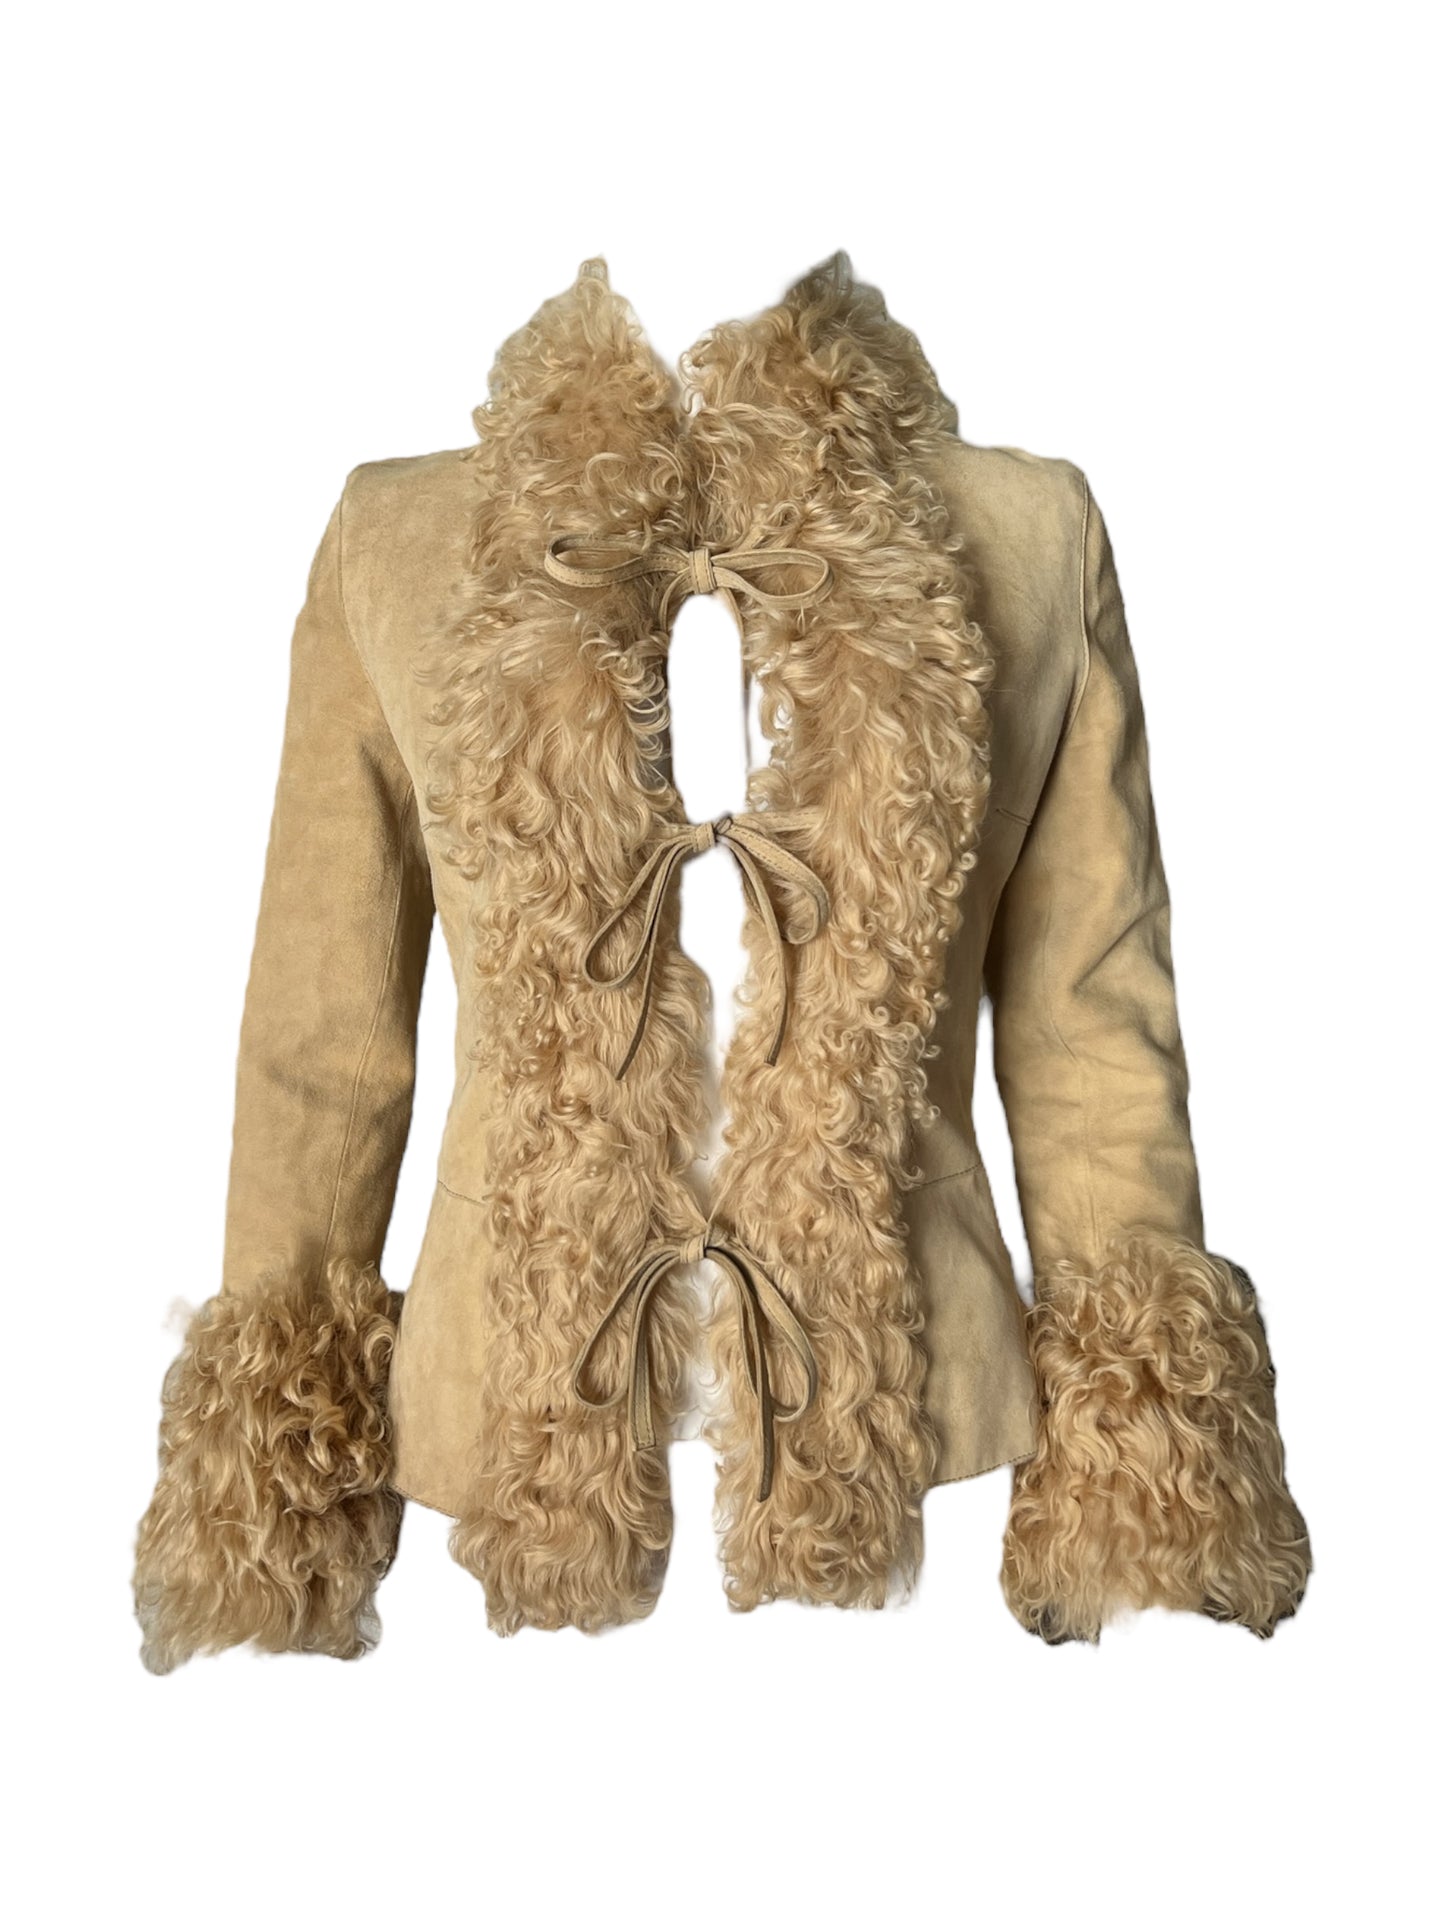 Dolce & Gabbana Fall 2001 Shearling Trim Coat with Tie Closures